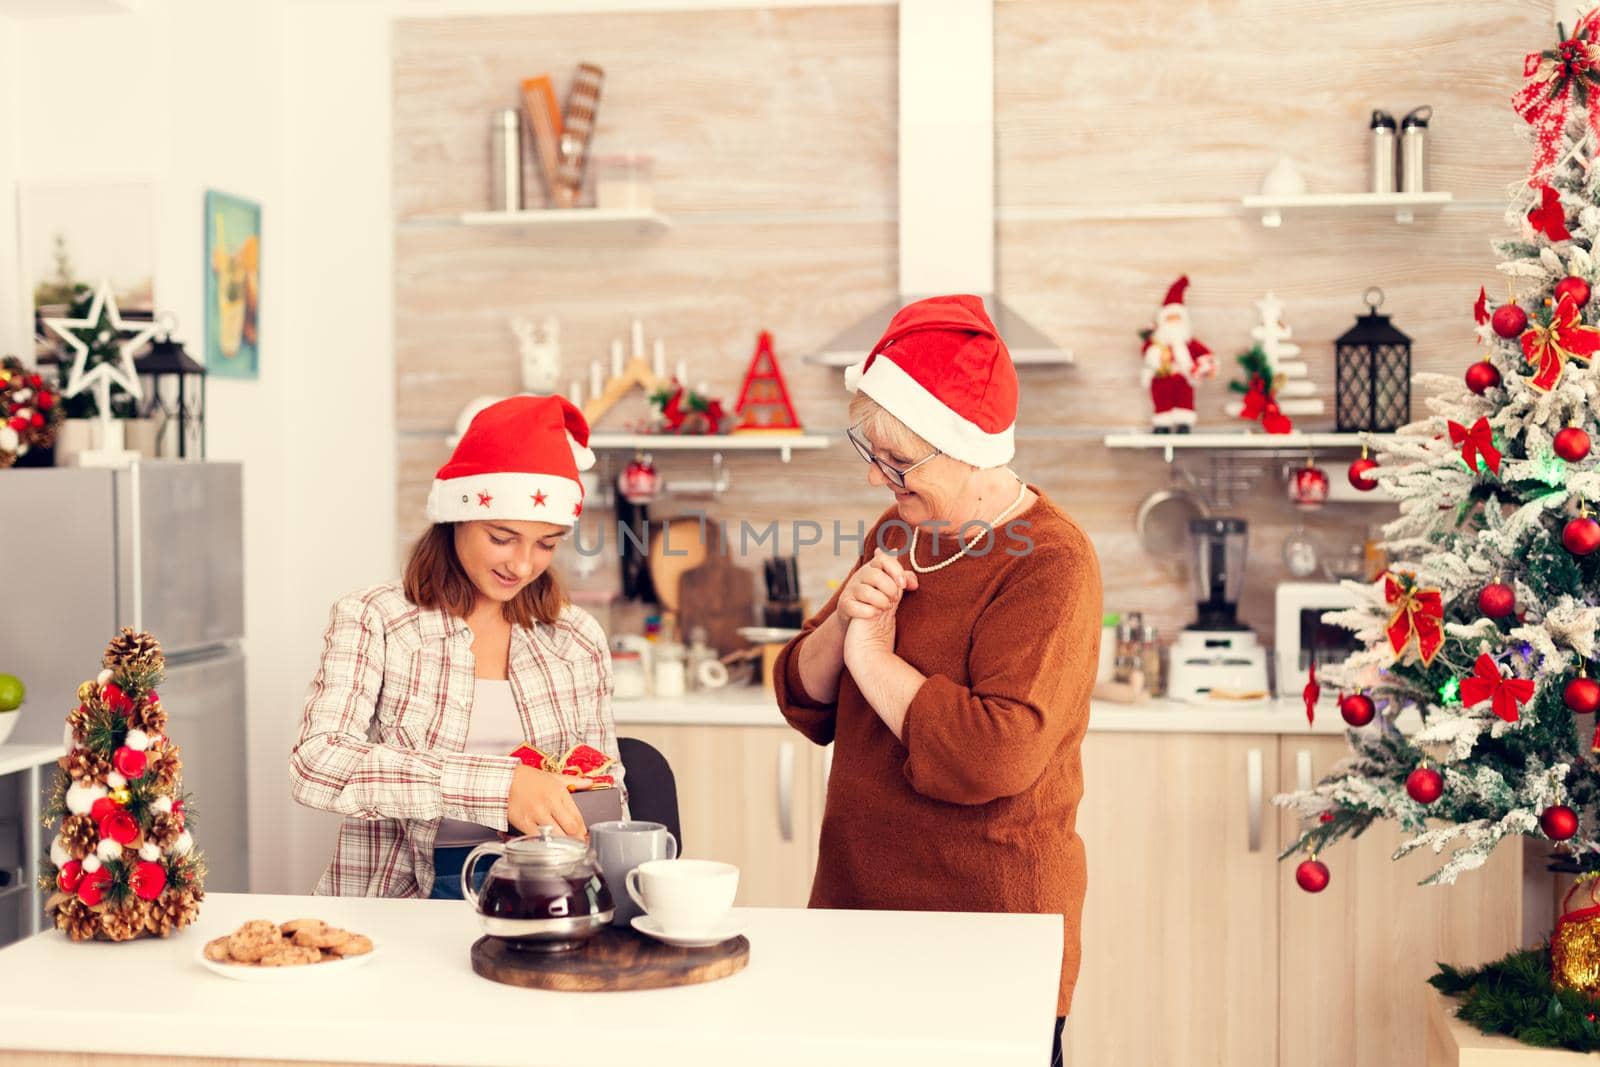 Joyful granny wearing red hat giving niece christmas gift box during enjoying time together. Senior woman wearing santa hat surprising granddaughter with winter holiday present in home kitchen with christmas tree in the background.